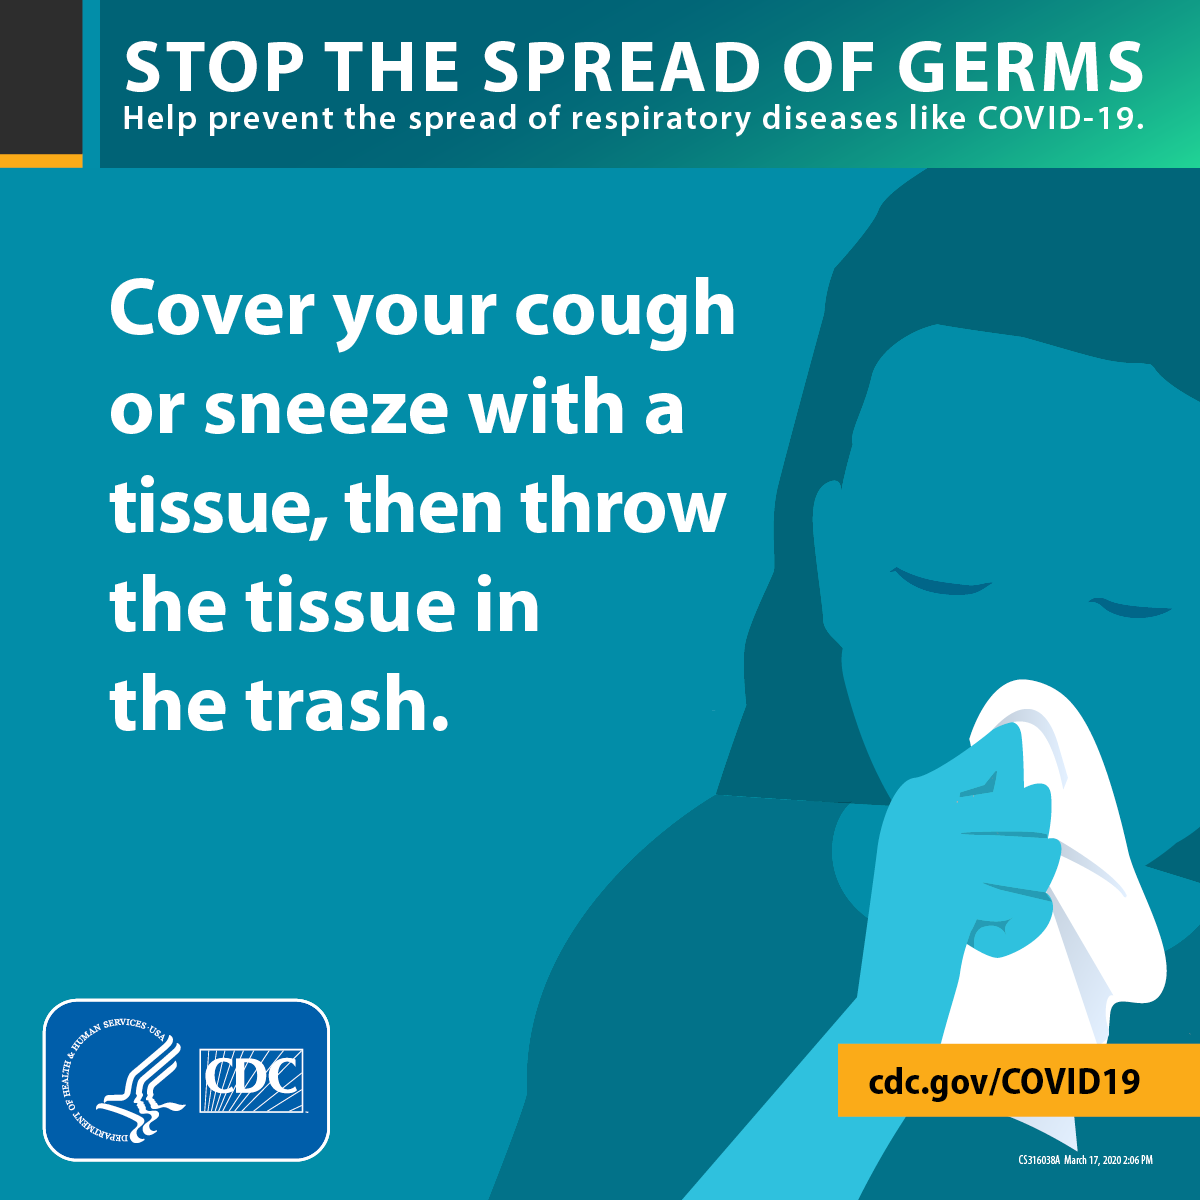 cover your cough with a sneeze or tissue